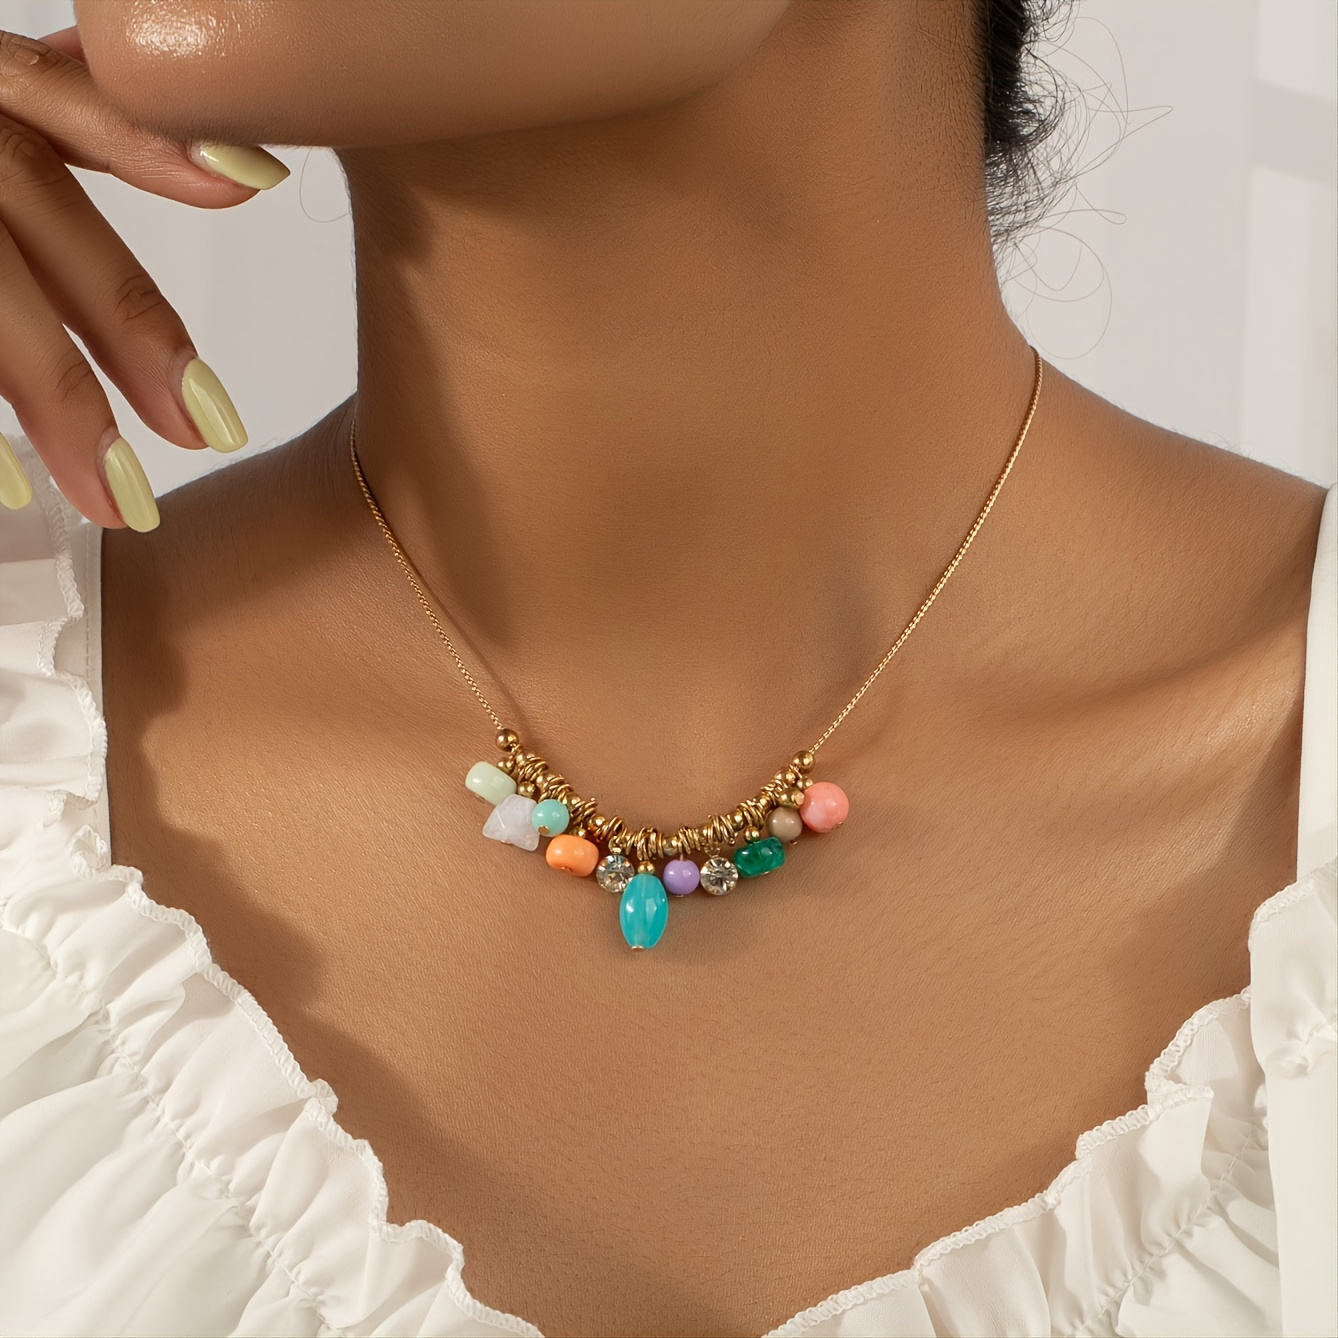 

Simple Bohemian Colorful Bead Necklace Clavicle Chain Women's Fashion Accessories